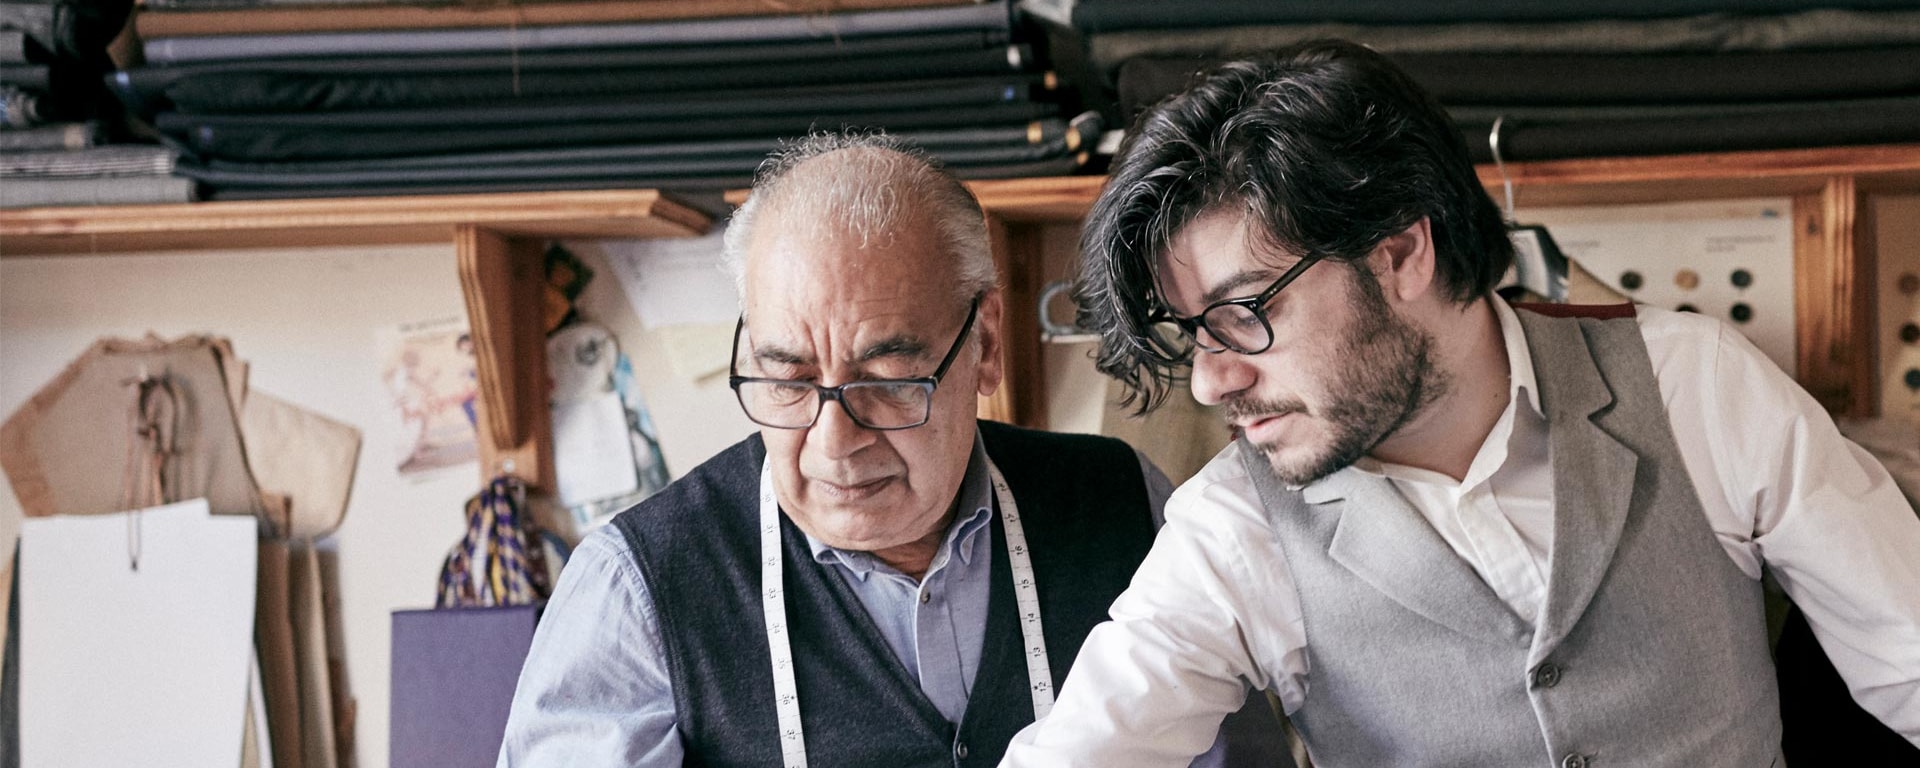 A father and his son work together in the family business.